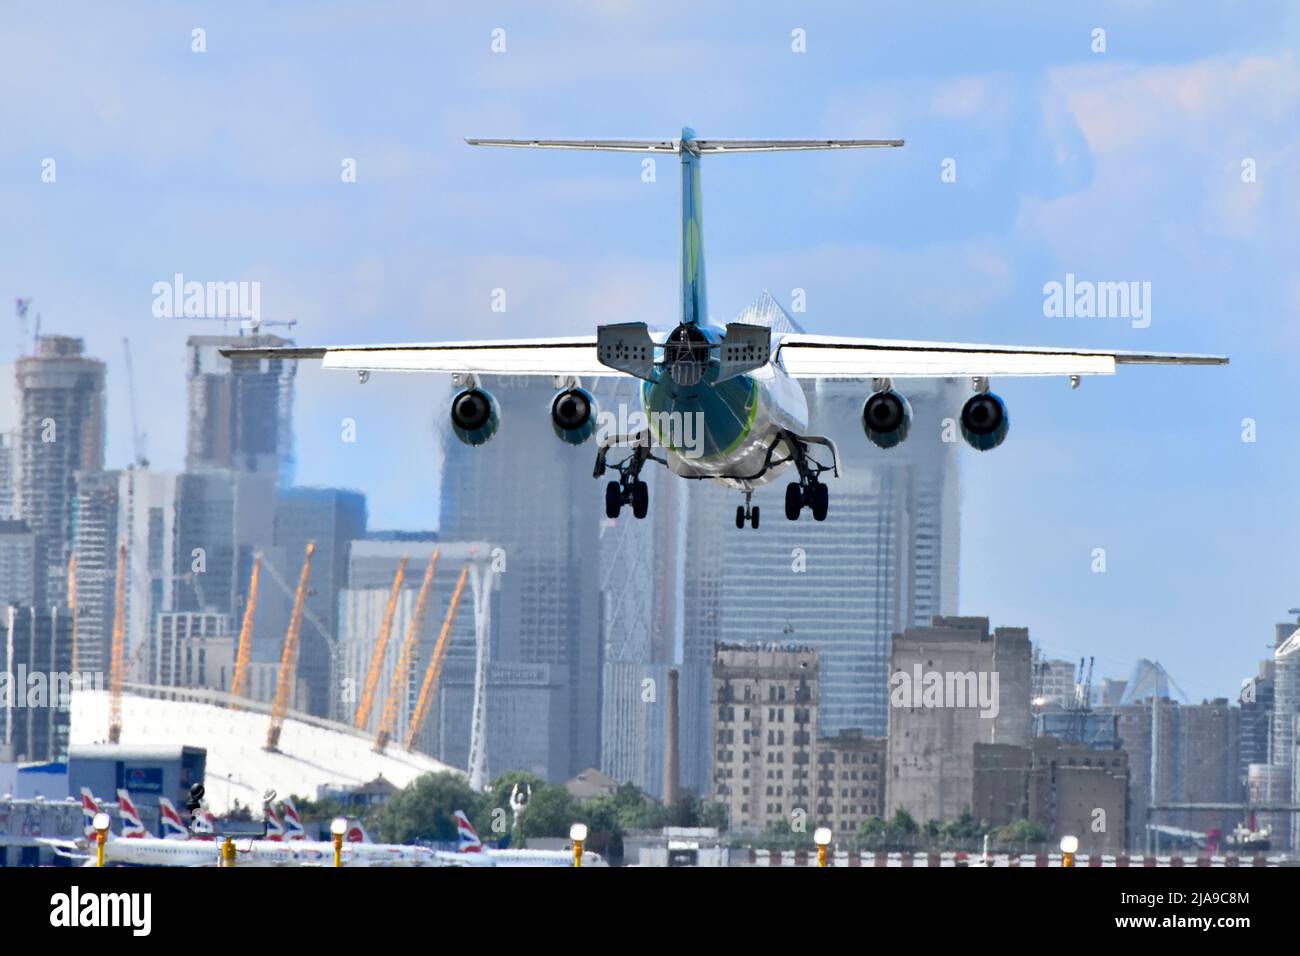 Close up back view of four engine passenger aircraft landing at London City Airport Newham with O2 & arena Canary Wharf in London Docklands England UK Stock Photo